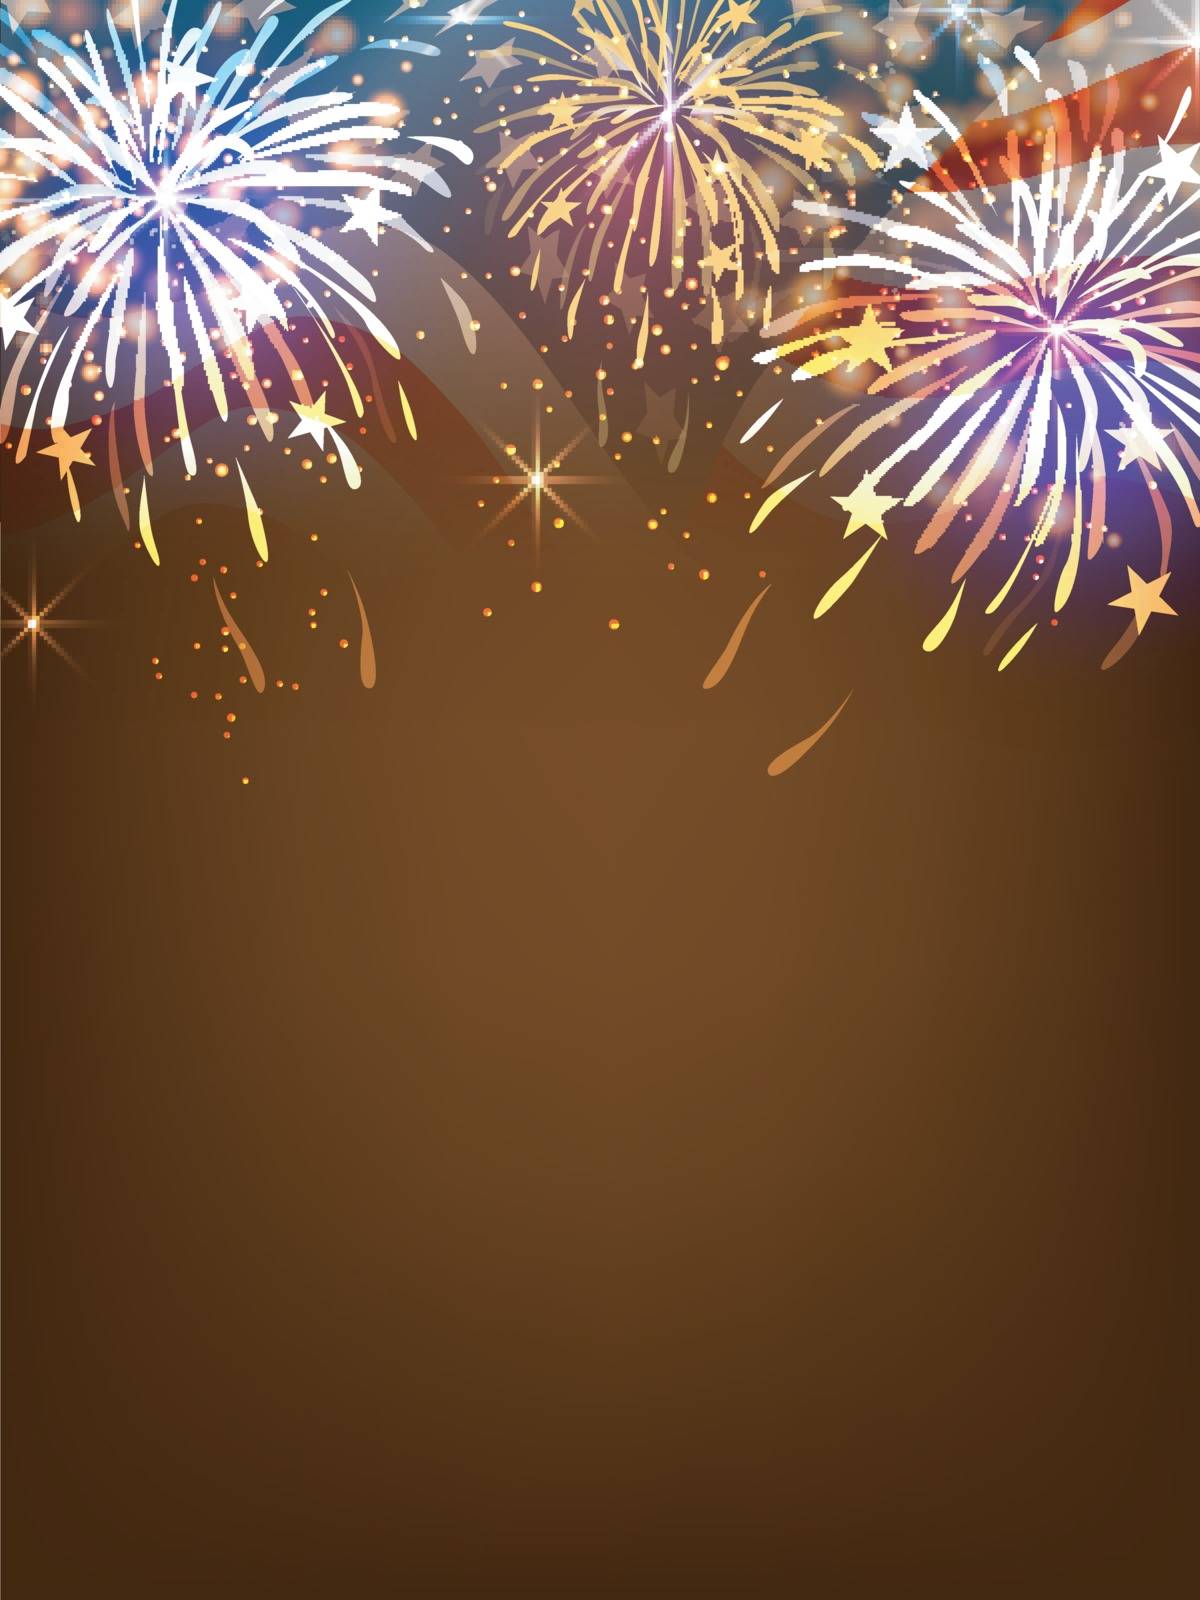 Sparkling fireworks explosion background with American Flag for 4th of July, Independence Day celebration.